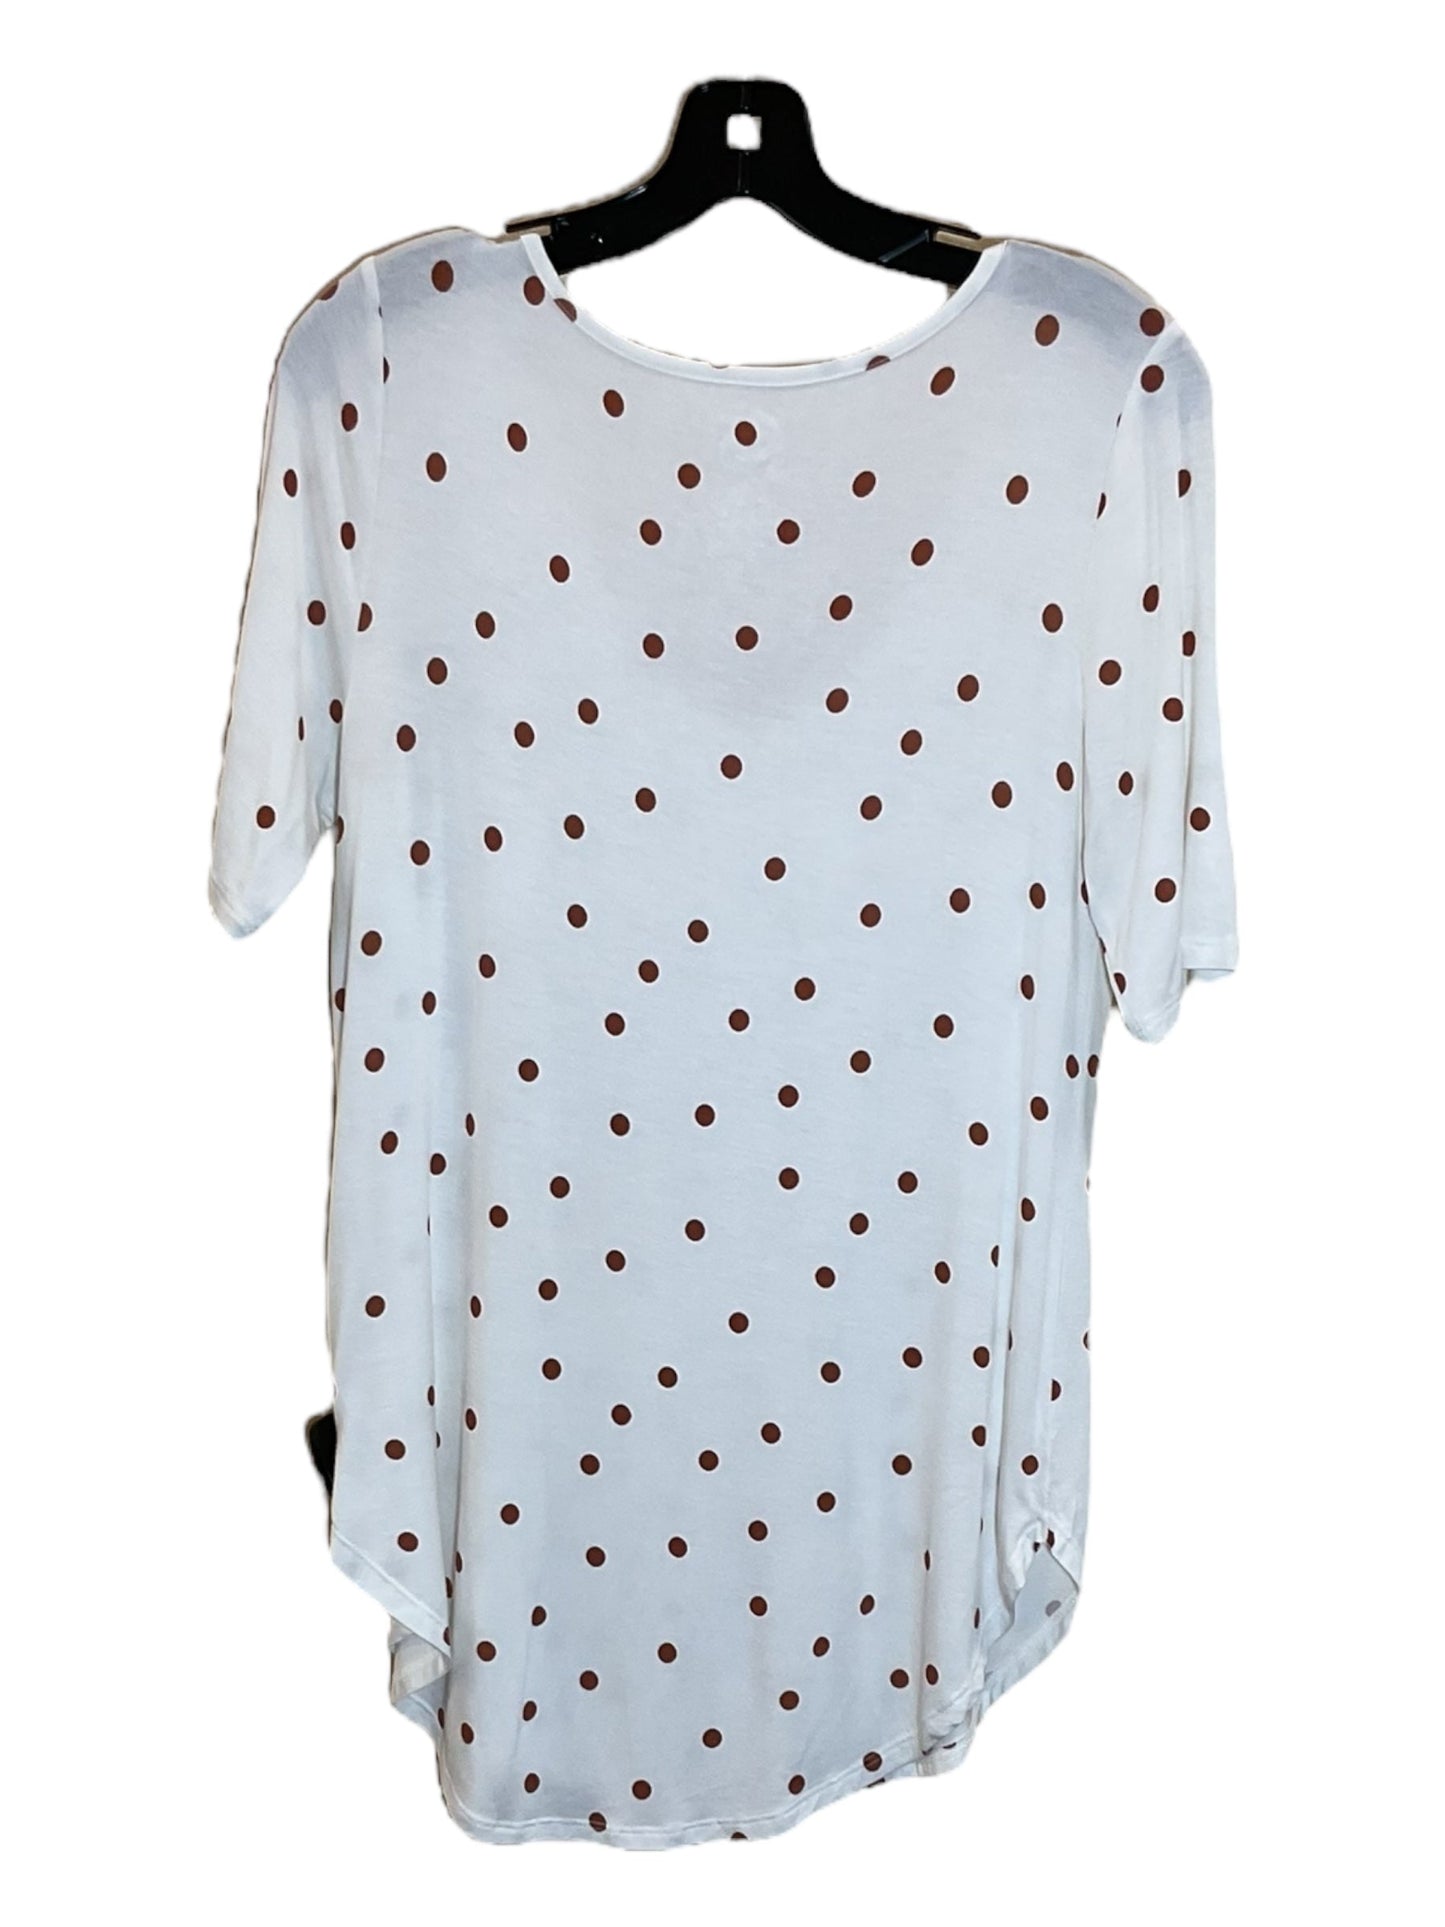 Polkadot Pattern Top Short Sleeve Maurices, Size S